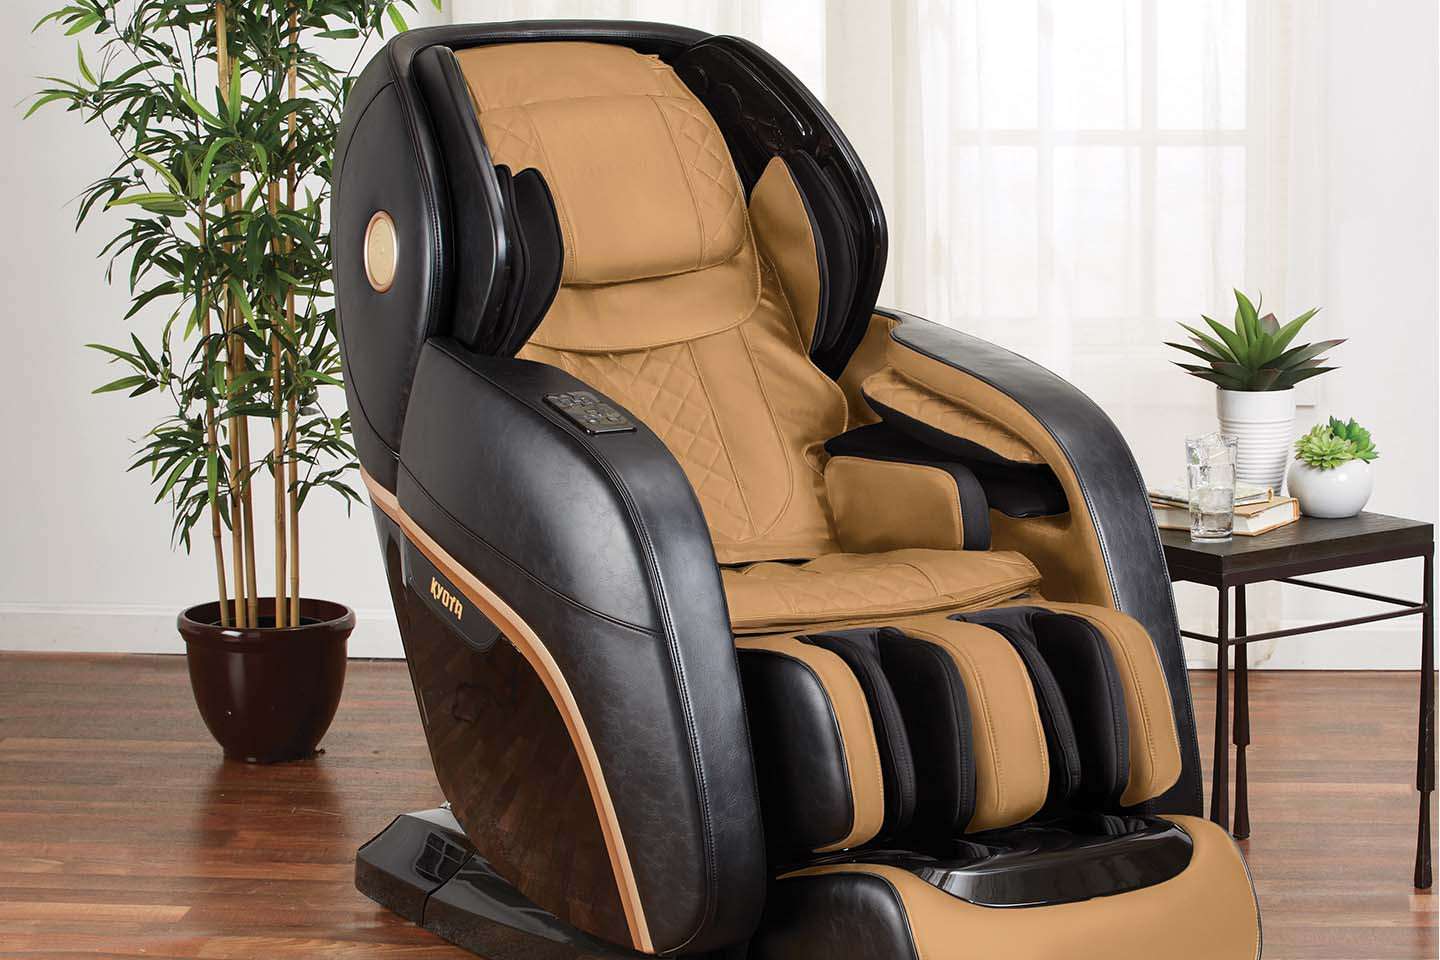 The 10 Best Massage Chairs (2020 Reviews)